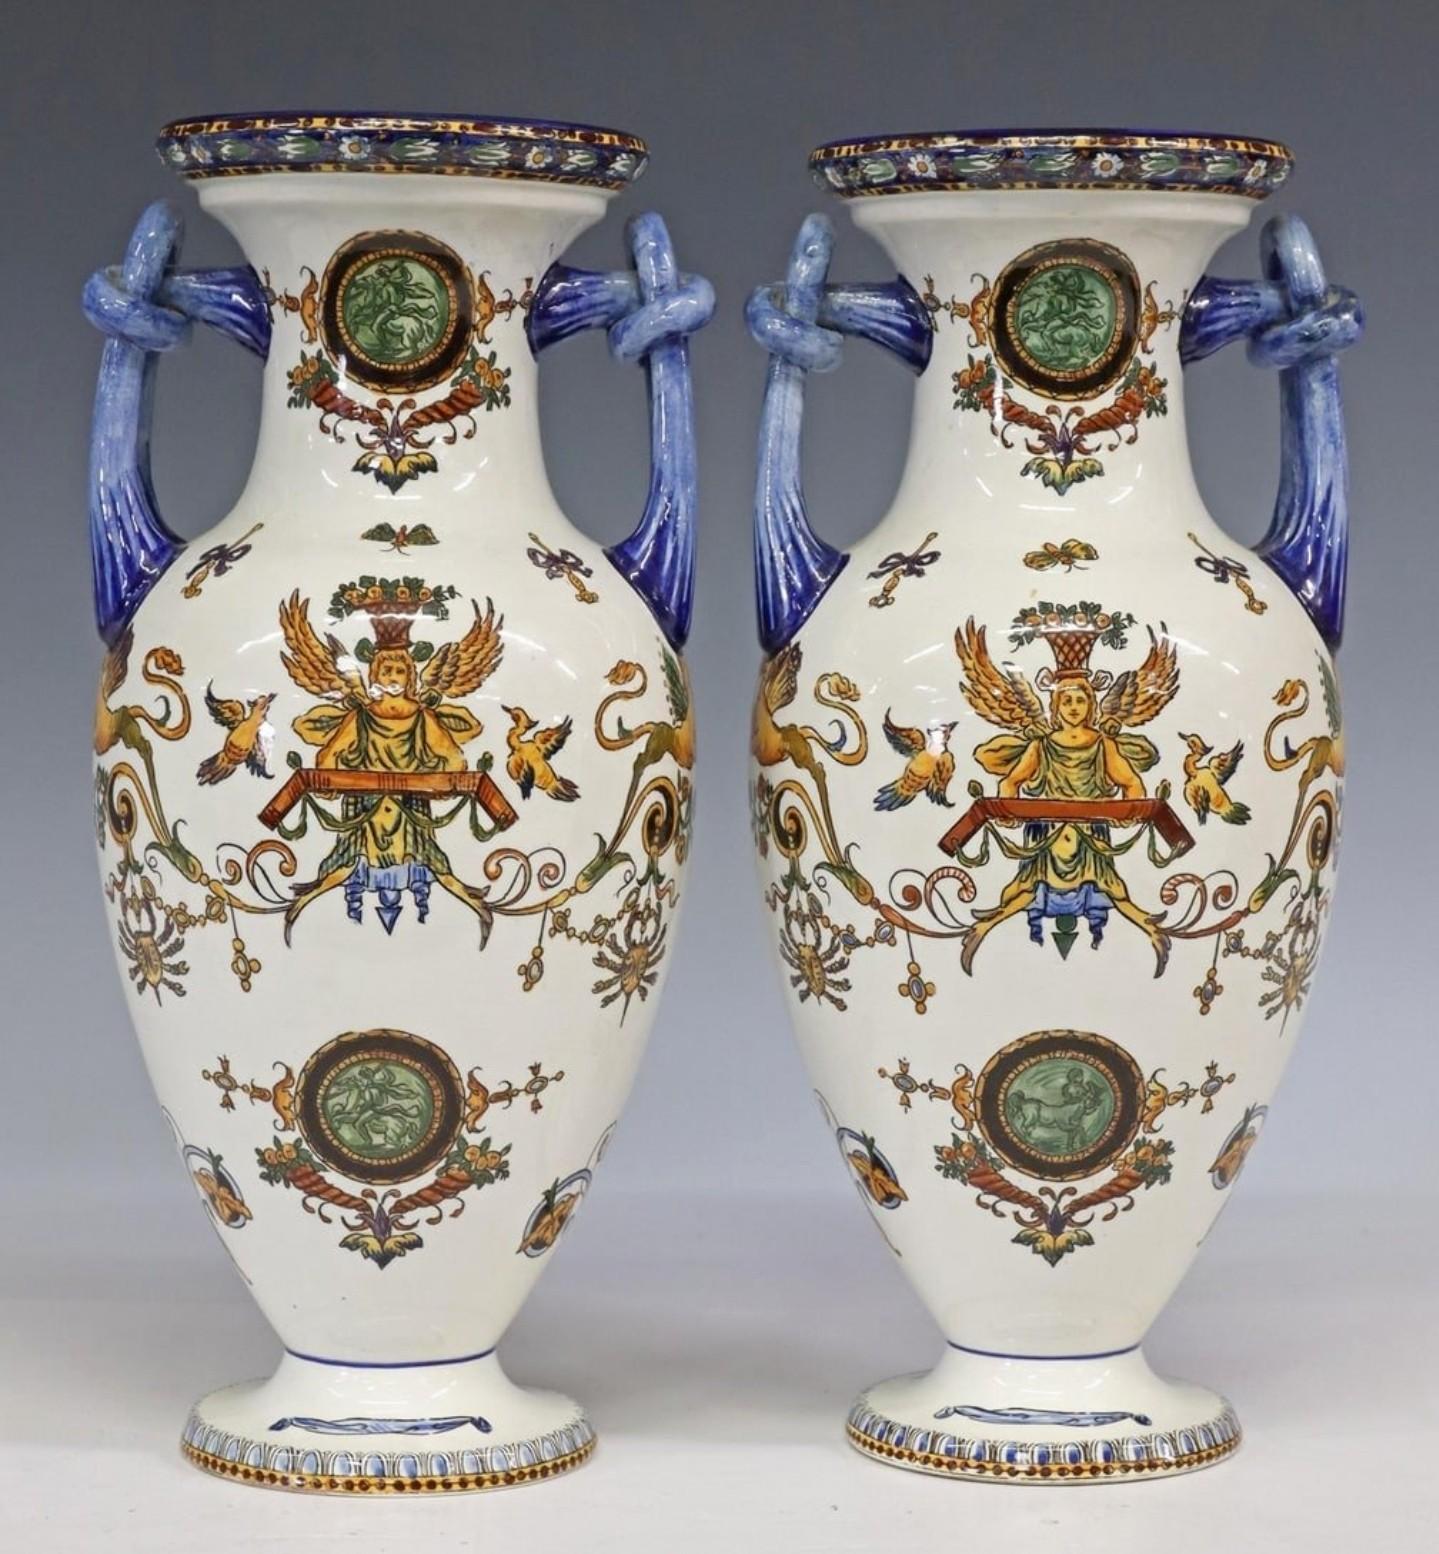 A remarkable pair of French faience earthenware vases by Faïencerie de Gien, likely late 19th century, double handled flared baluster amphora form, richly detailed, with fine hand painted decoration in the classic Italian Renaissance style. Cream -